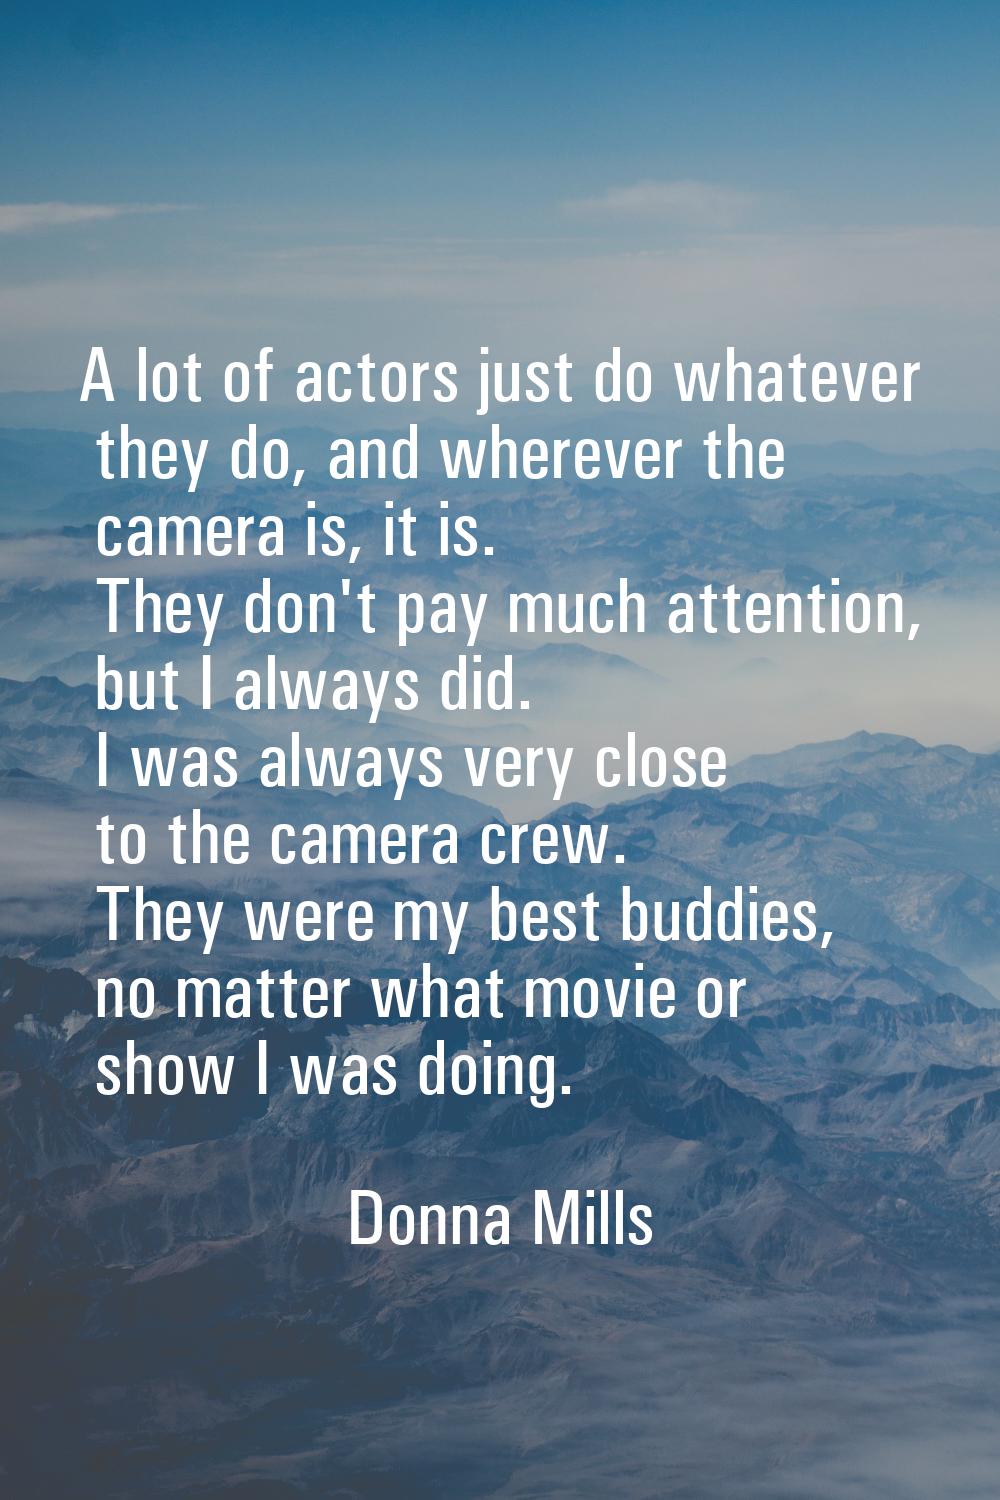 A lot of actors just do whatever they do, and wherever the camera is, it is. They don't pay much at